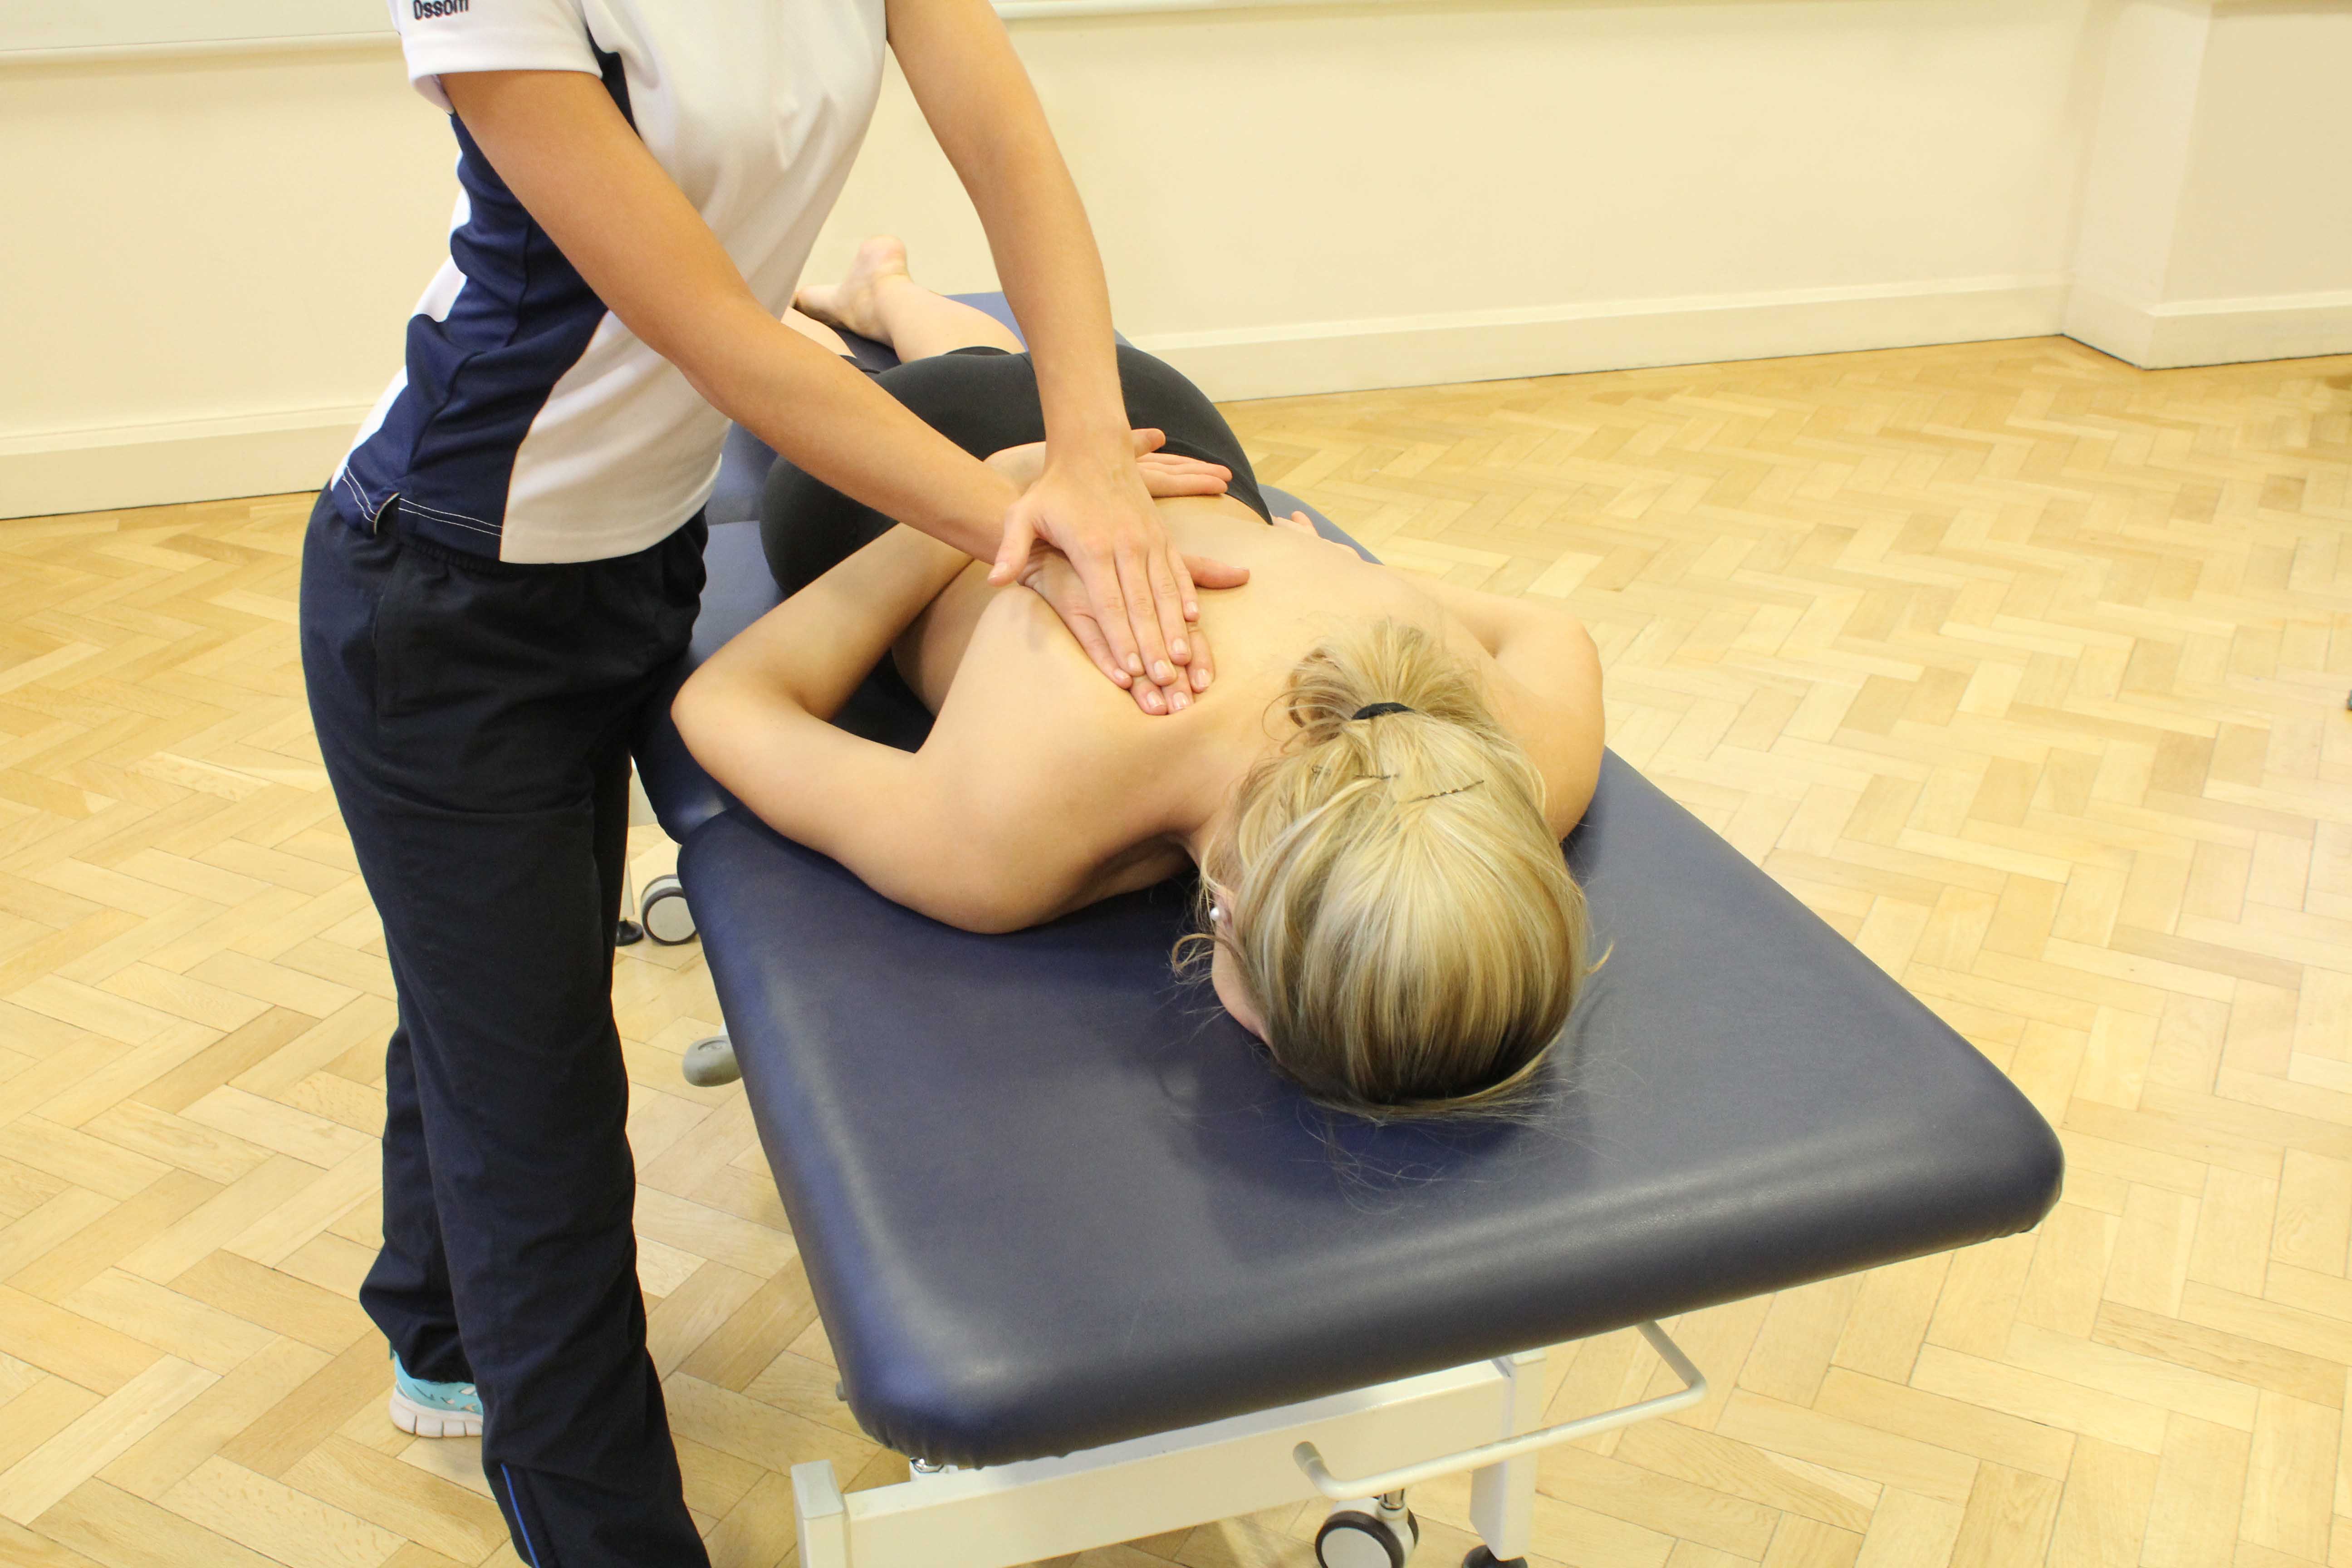 Soft tissue massage of the trapezius muscles to reliev pain and stiffness